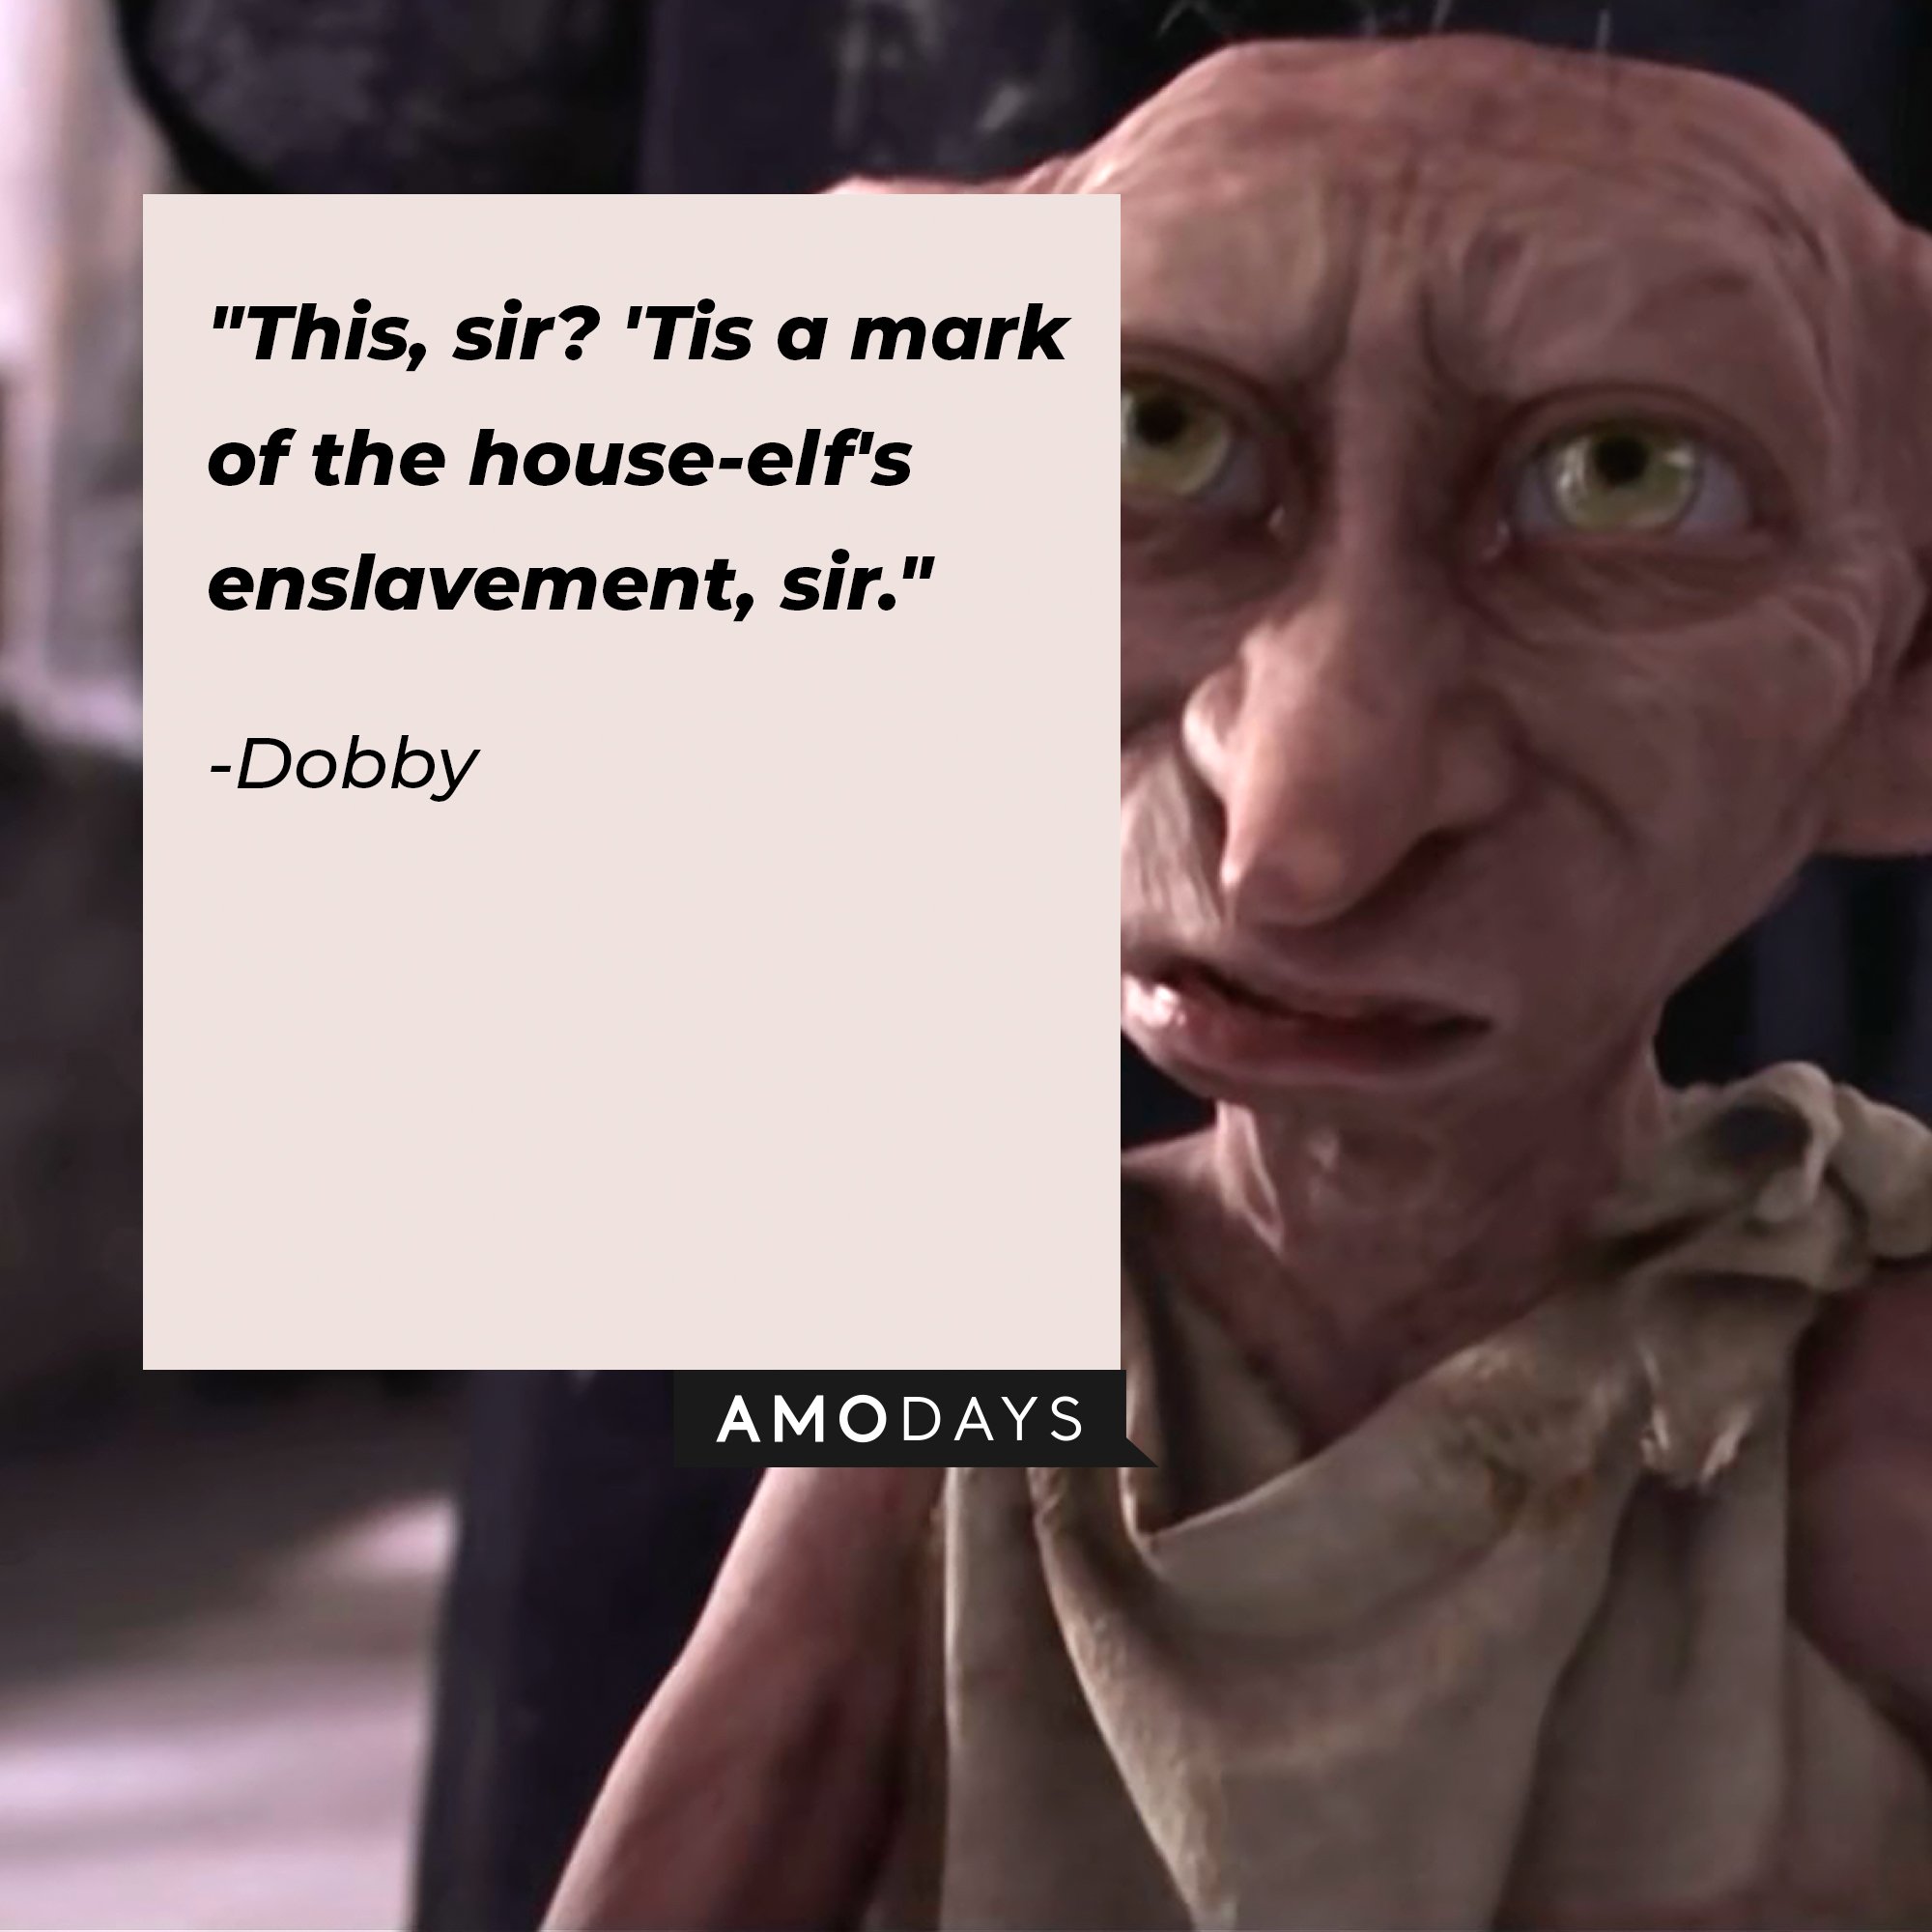 Dobby’s quote: "This, sir? 'Tis a mark of the house-elf's enslavement, sir." | Image: AmoDays